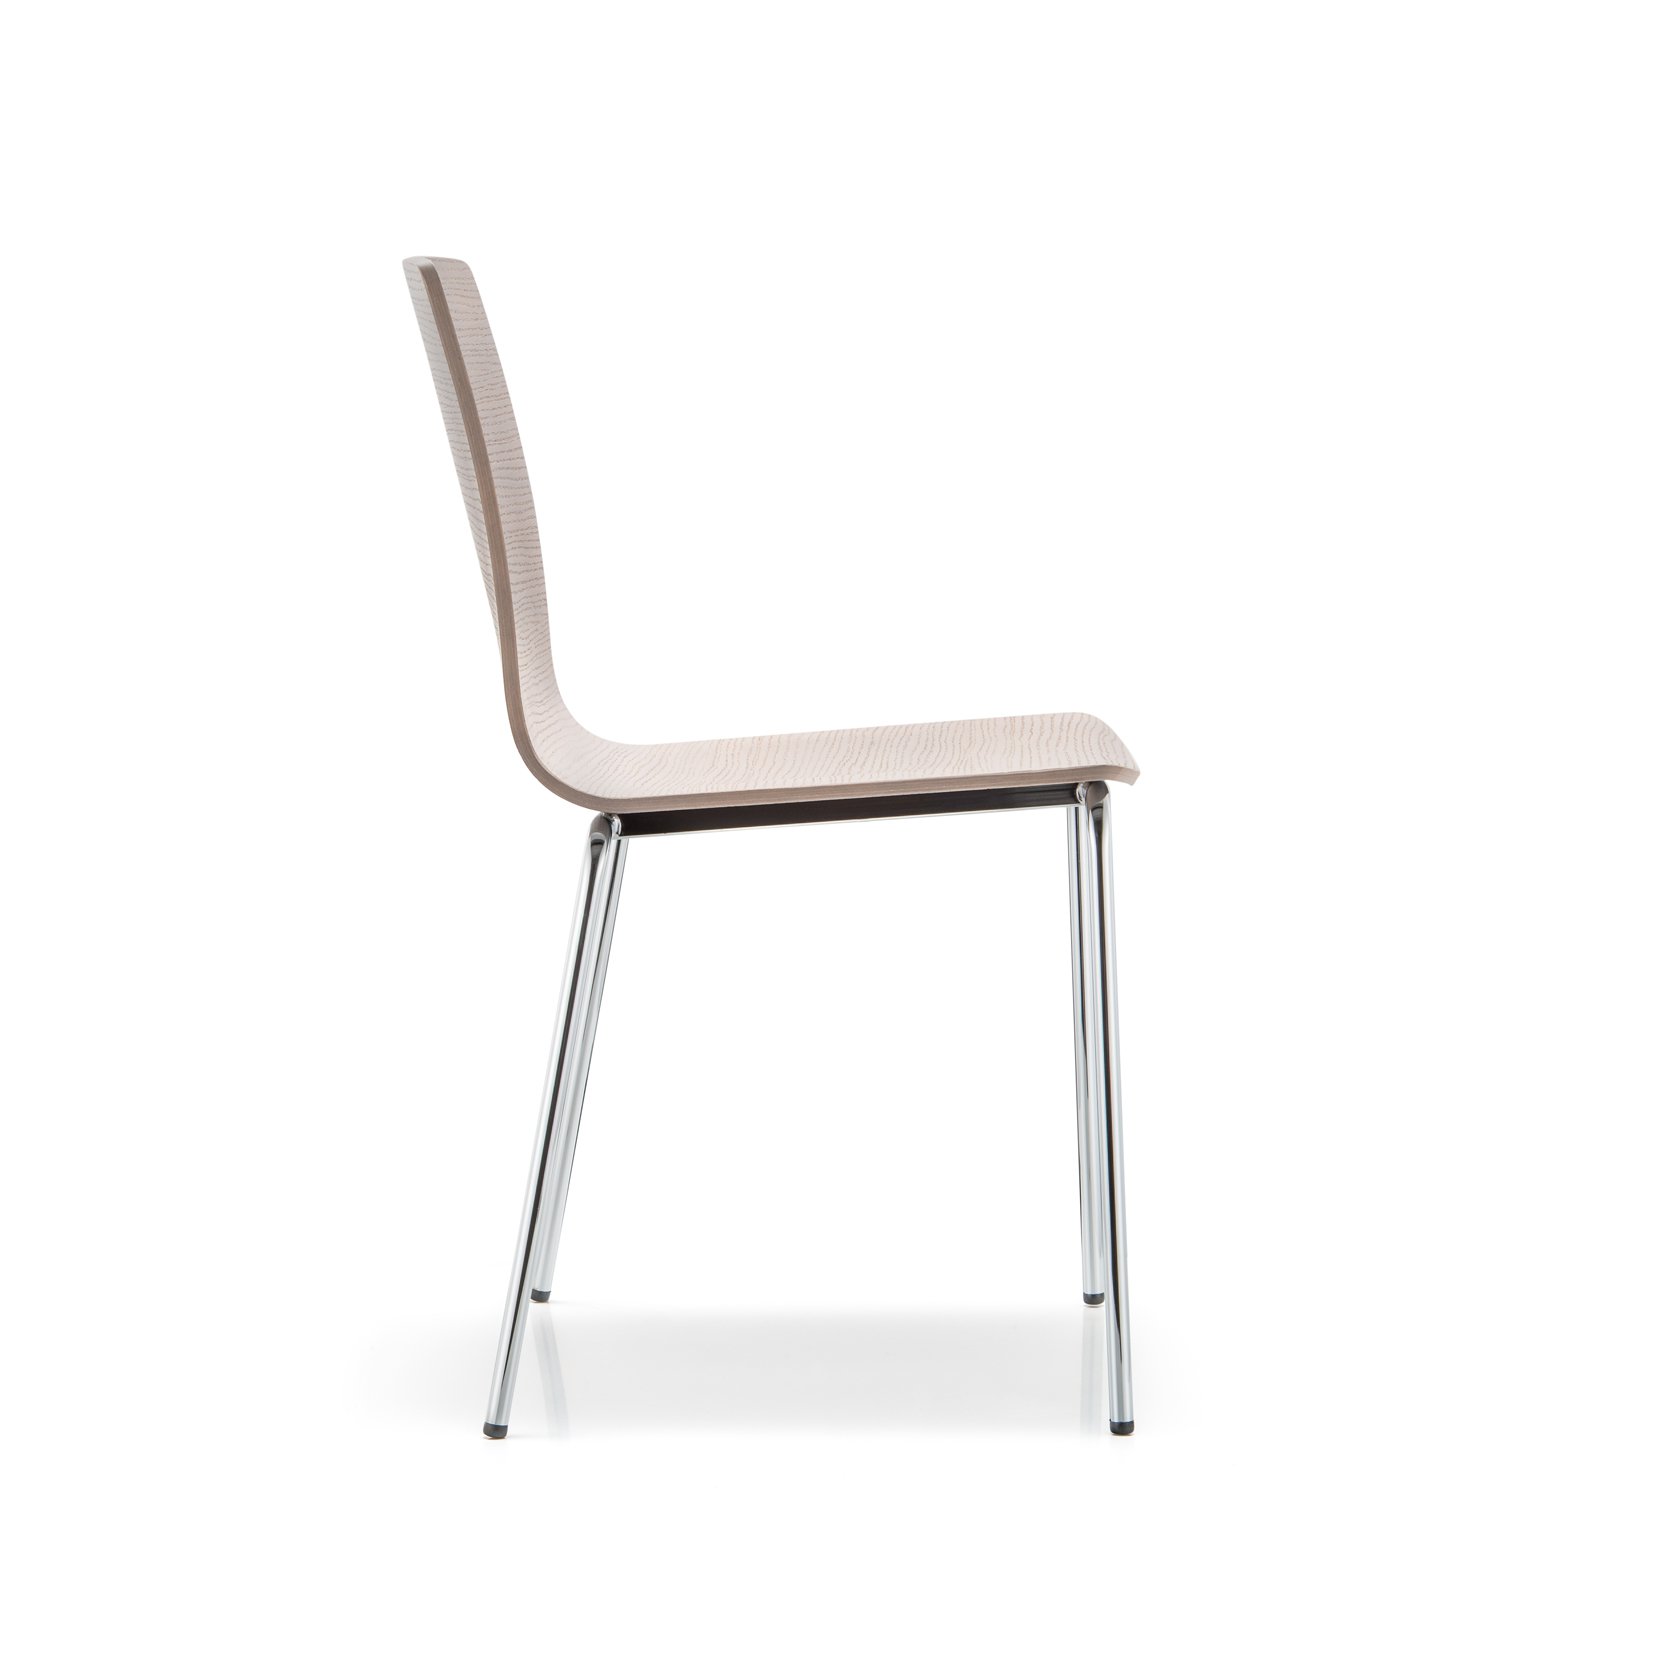 Inga 5613 chair from Pedrali, designed by Pedrali R&D